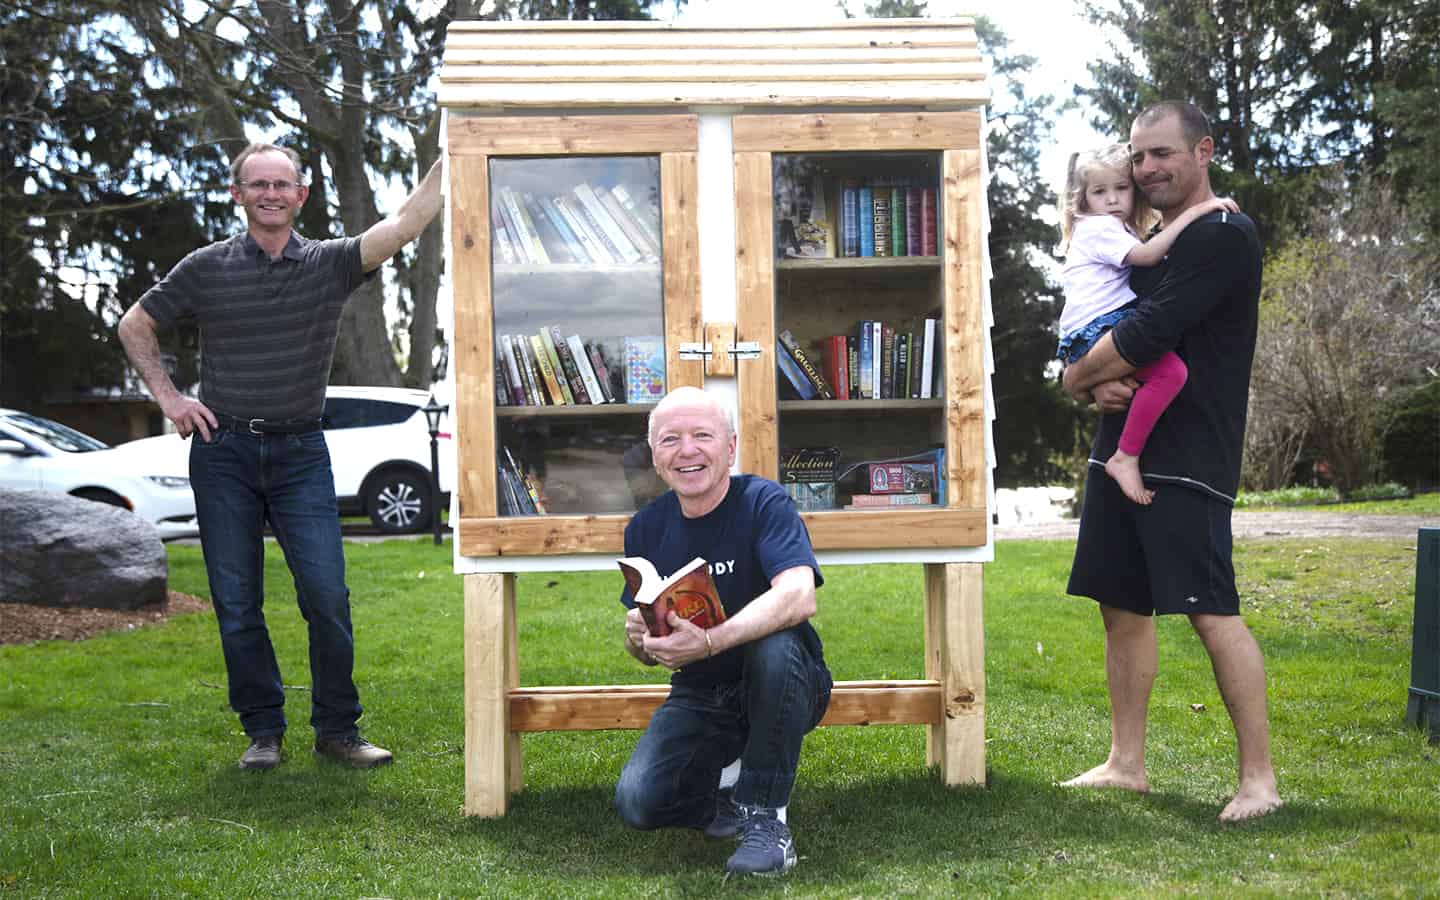 Neighbours see bigger as better when it comes to free “library”